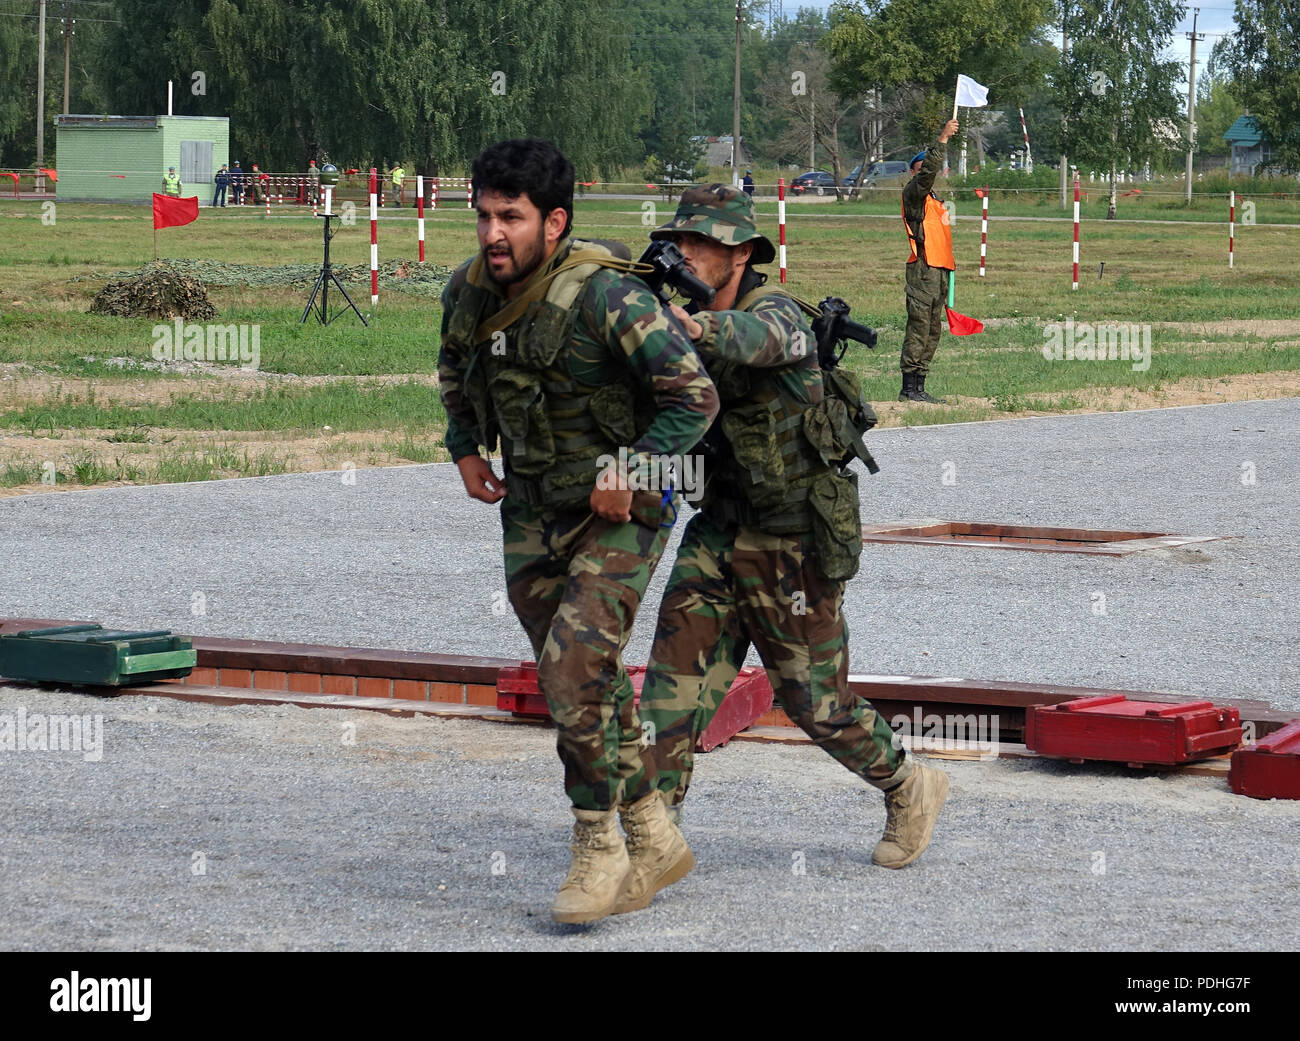 Pskow, Russia. 07th Aug, 2018. Pakistani paratroopers drive each other on the obstacle course of the International Army Games at the training area of the 76th Russian paratrooper division near Pskow. Teams from 32 nations are competing against each other in the Olympics of military skills. (on dpa 'Aircraft Darts and Tank Biathlon: Russia's Great Army Competition' of 10.08.2018) Credit: Friedemann Kohler/dpa/Alamy Live News Stock Photo